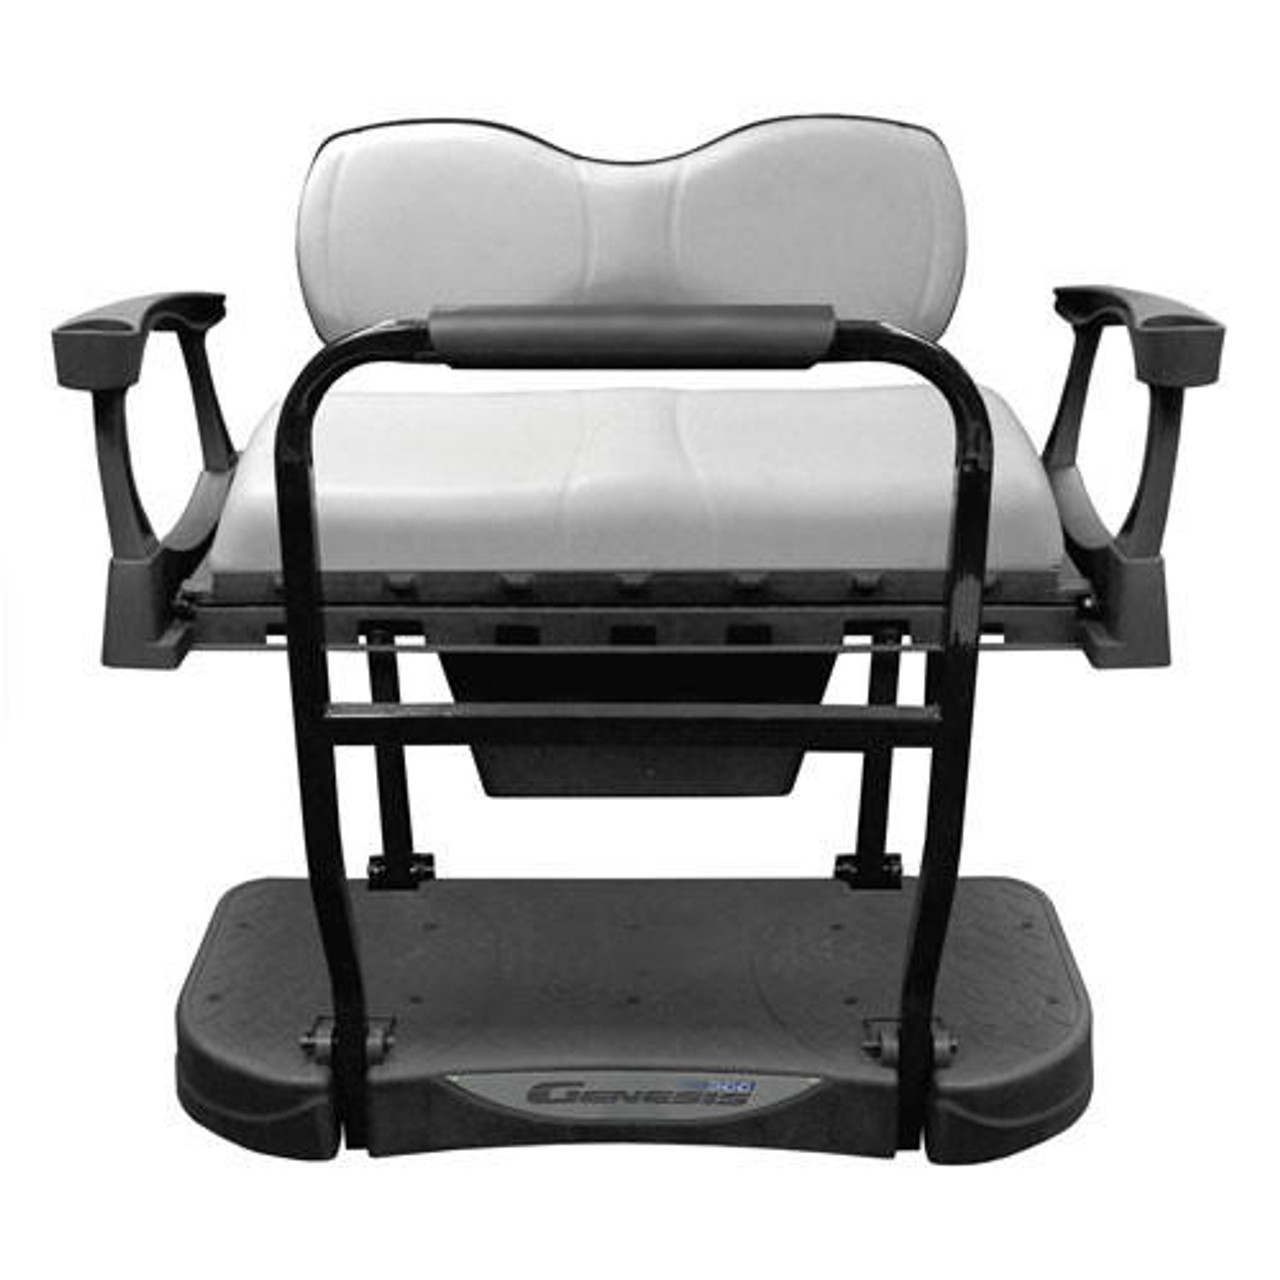  Madjax Genesis 250 Rear Flip Seat with Deluxe White Cushions